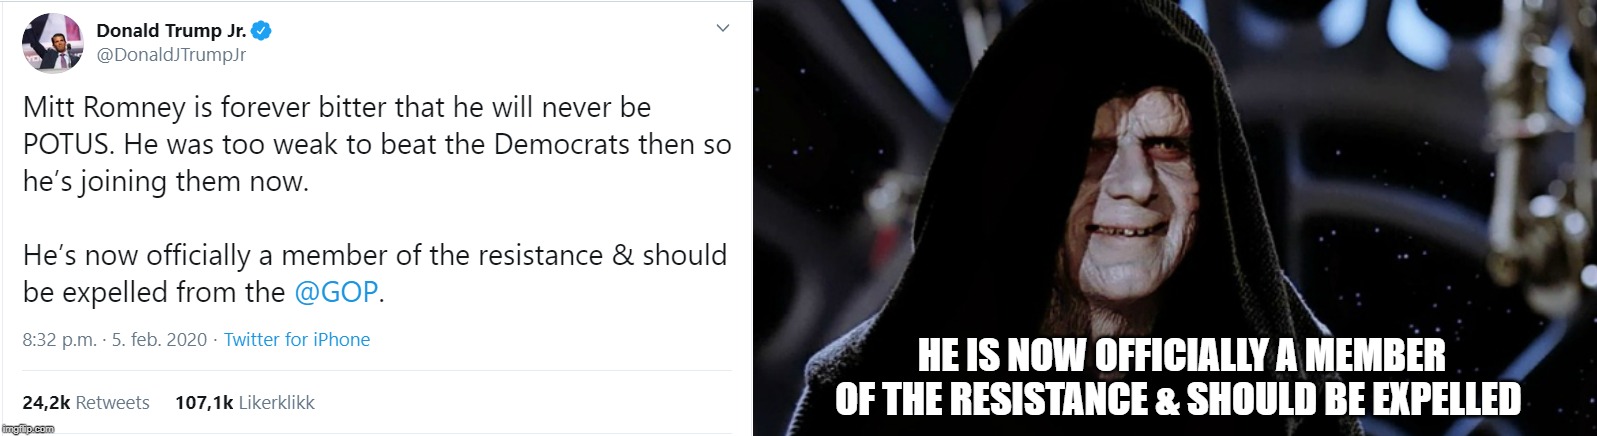 HE IS NOW OFFICIALLY A MEMBER OF THE RESISTANCE & SHOULD BE EXPELLED | image tagged in star wars emperor,inquisitor trump jr | made w/ Imgflip meme maker